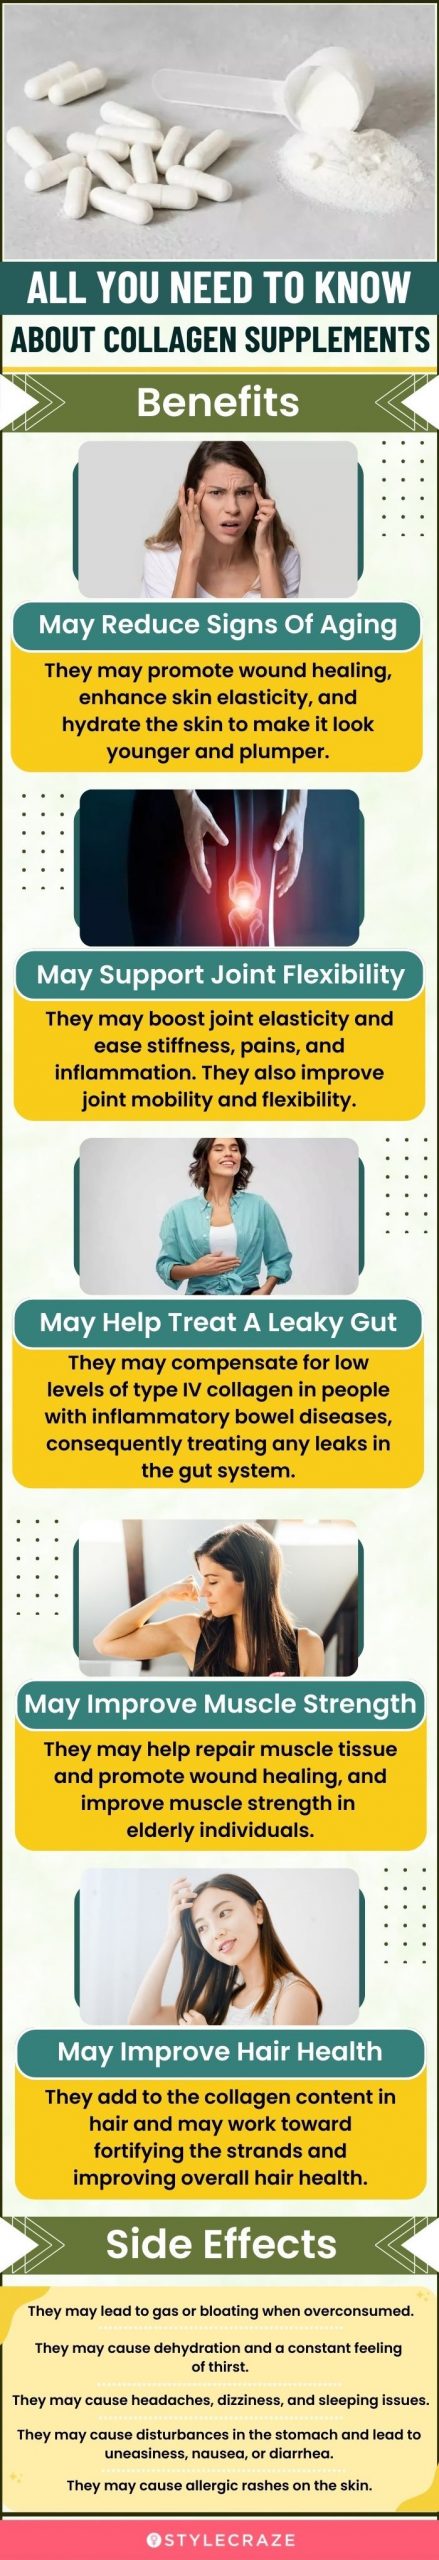 all you need to know about collagen supplements (infographic)